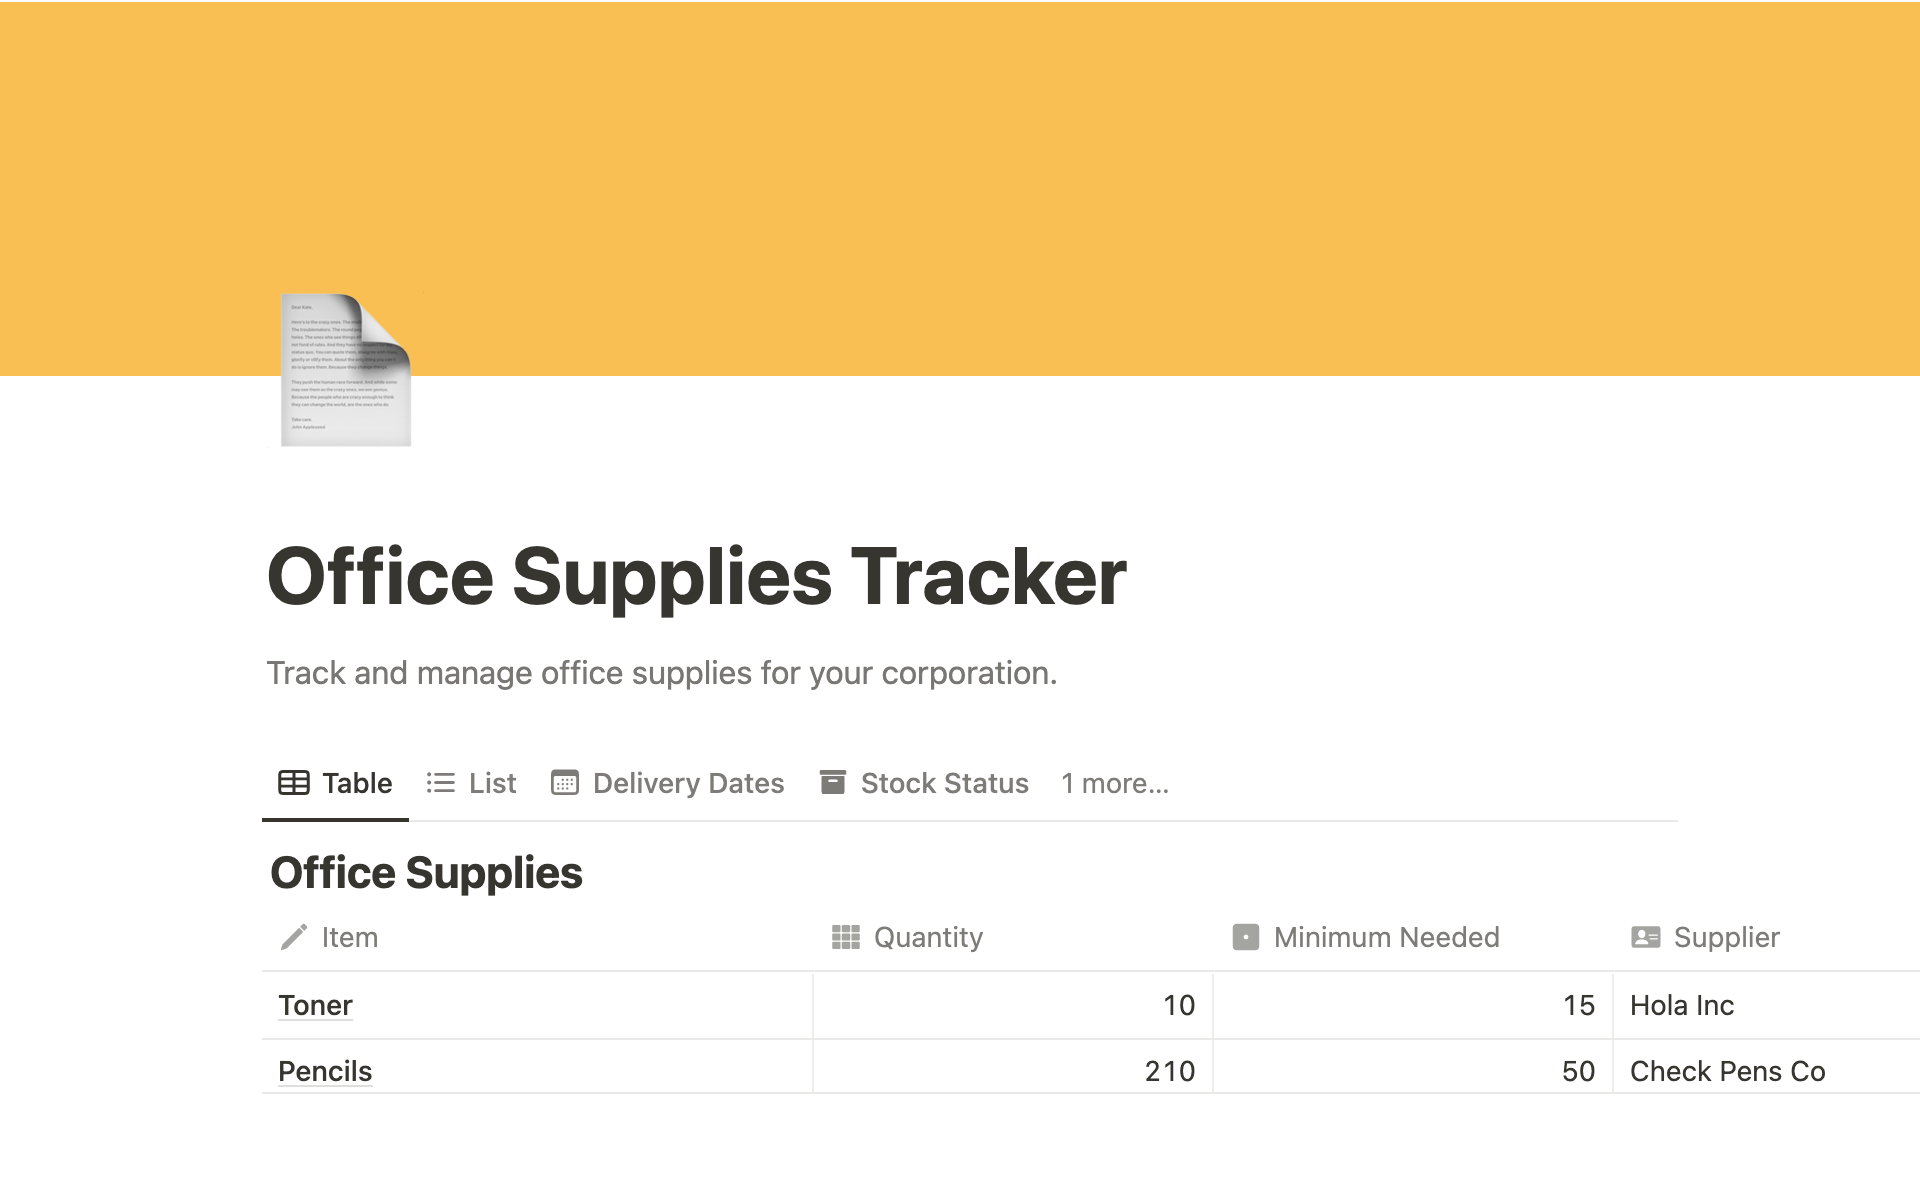 Track and manage office supplies.